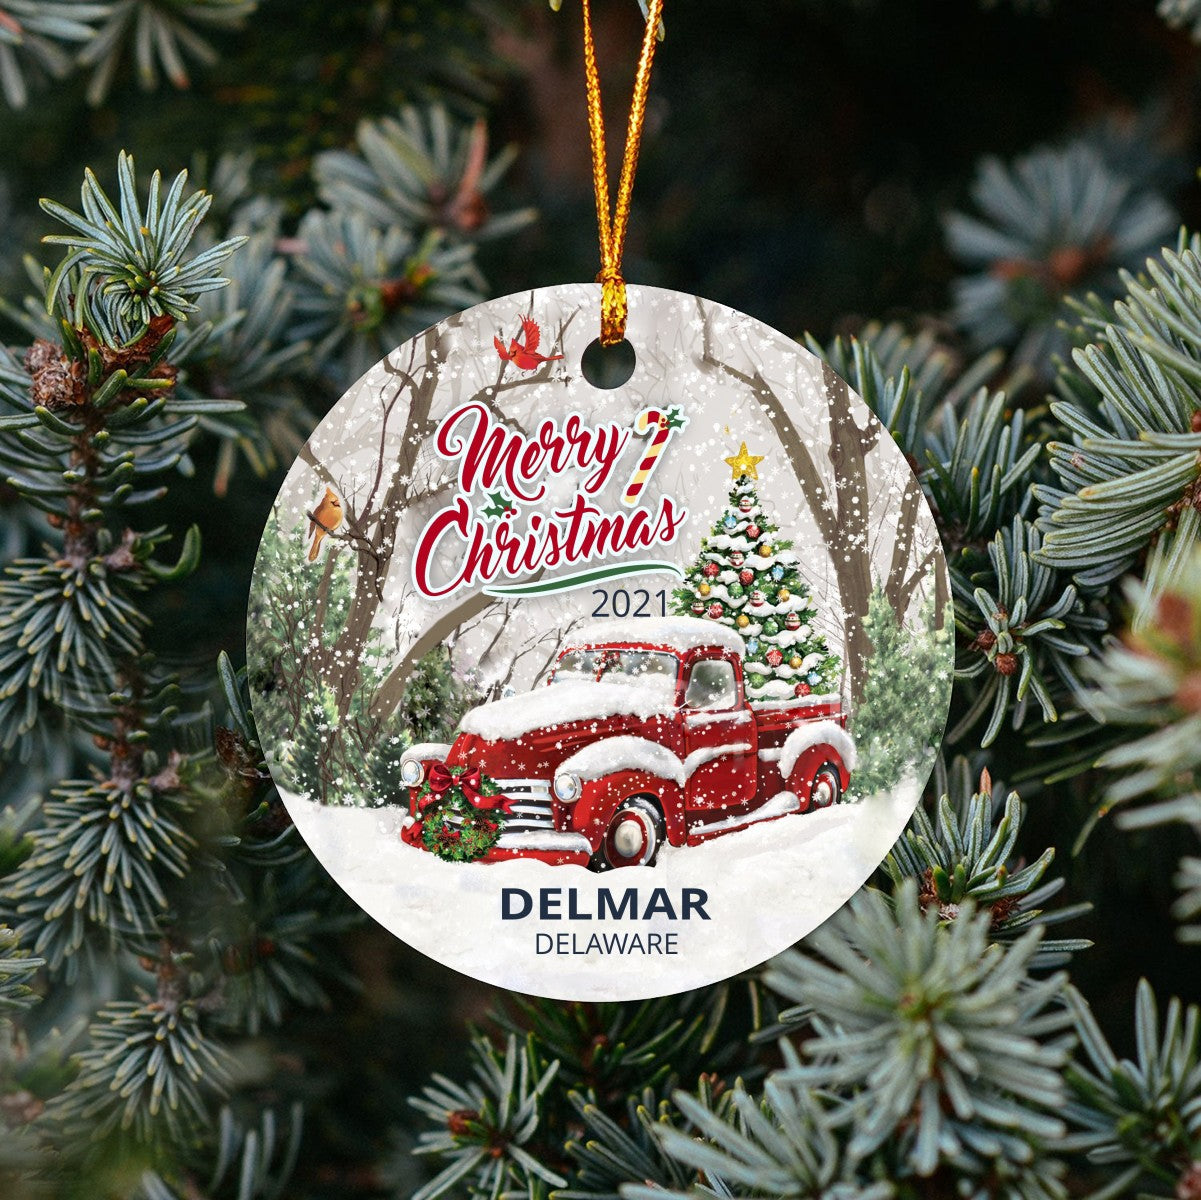 Christmas Tree Ornaments Delmar - Ornament With Name City, State Delmar Delaware DE Ornament - Red Truck Xmas Ornaments 3'' Plastic Gift For Family, Friend And Housewarming